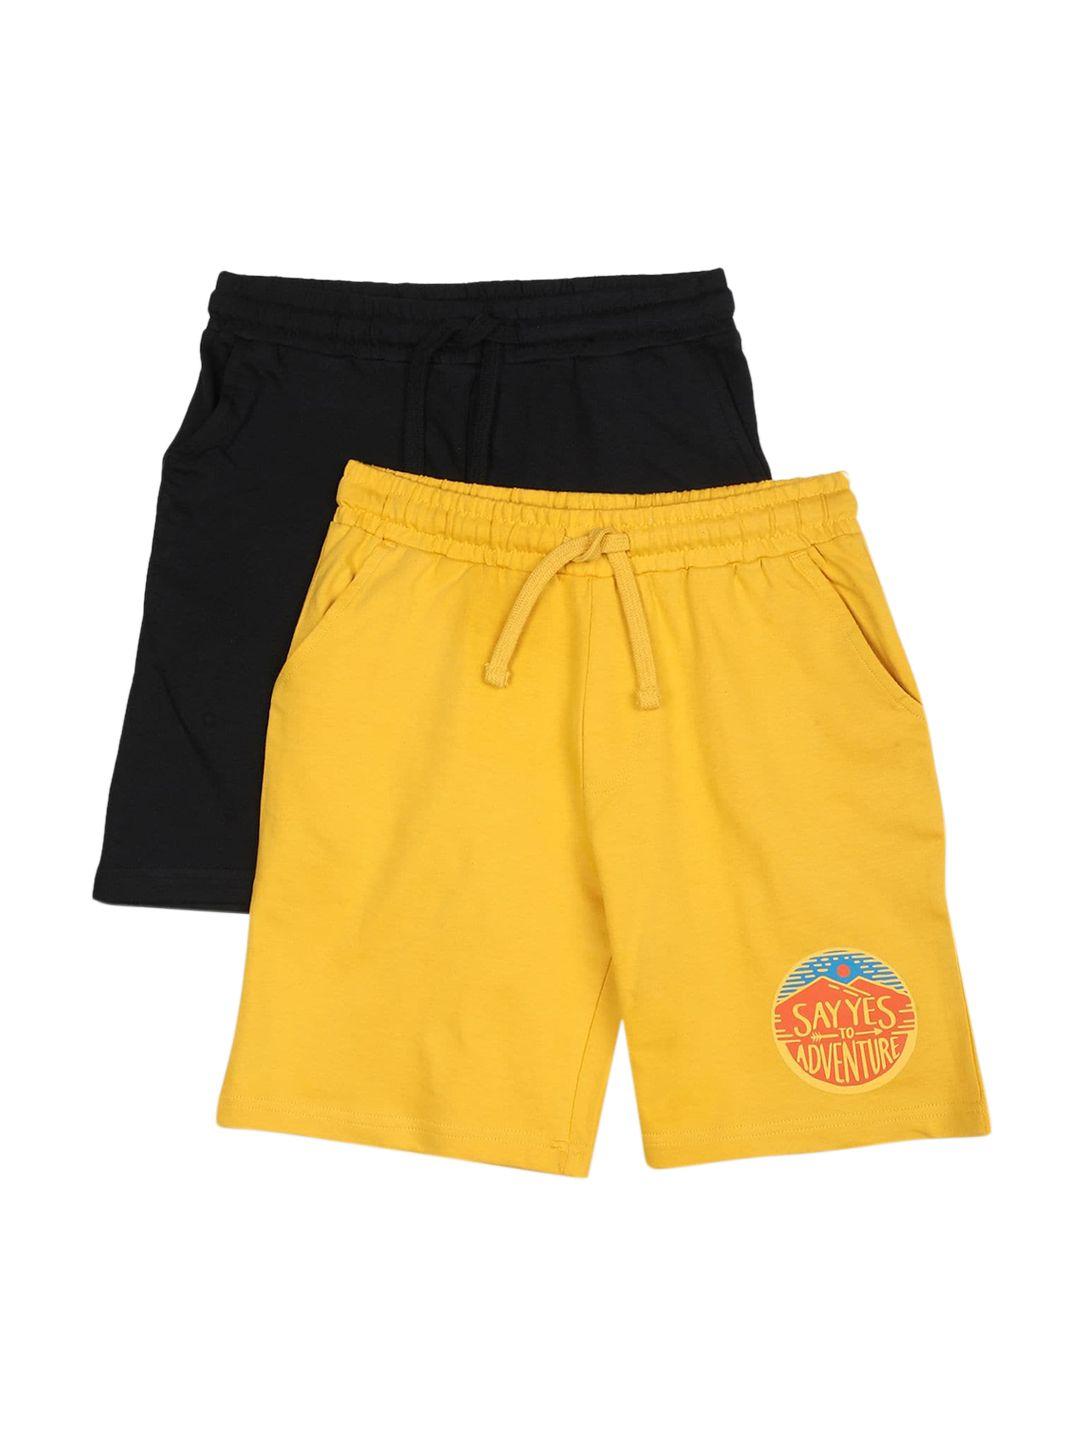 ruggers junior boys assorted pack of 2 pure cotton shorts